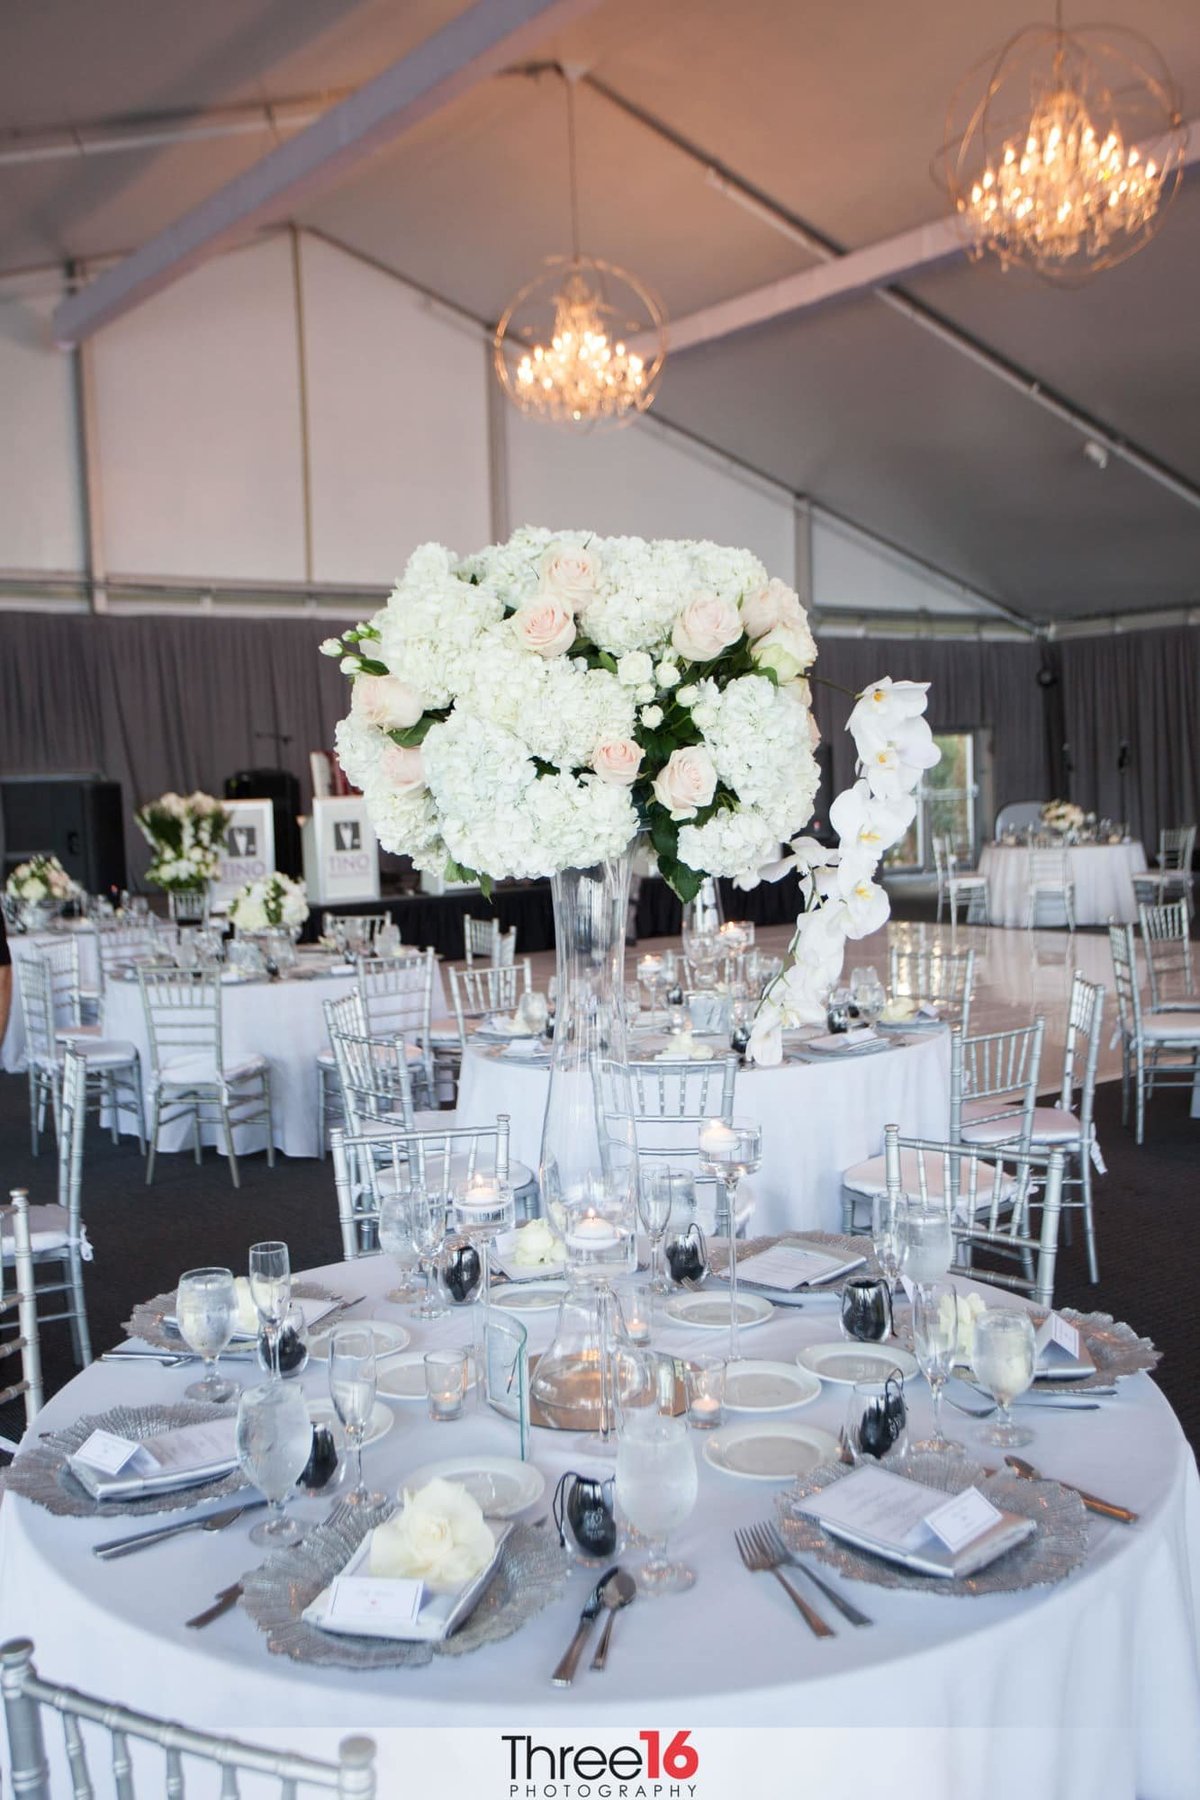 Beautiful wedding reception table setup with large centerpieces